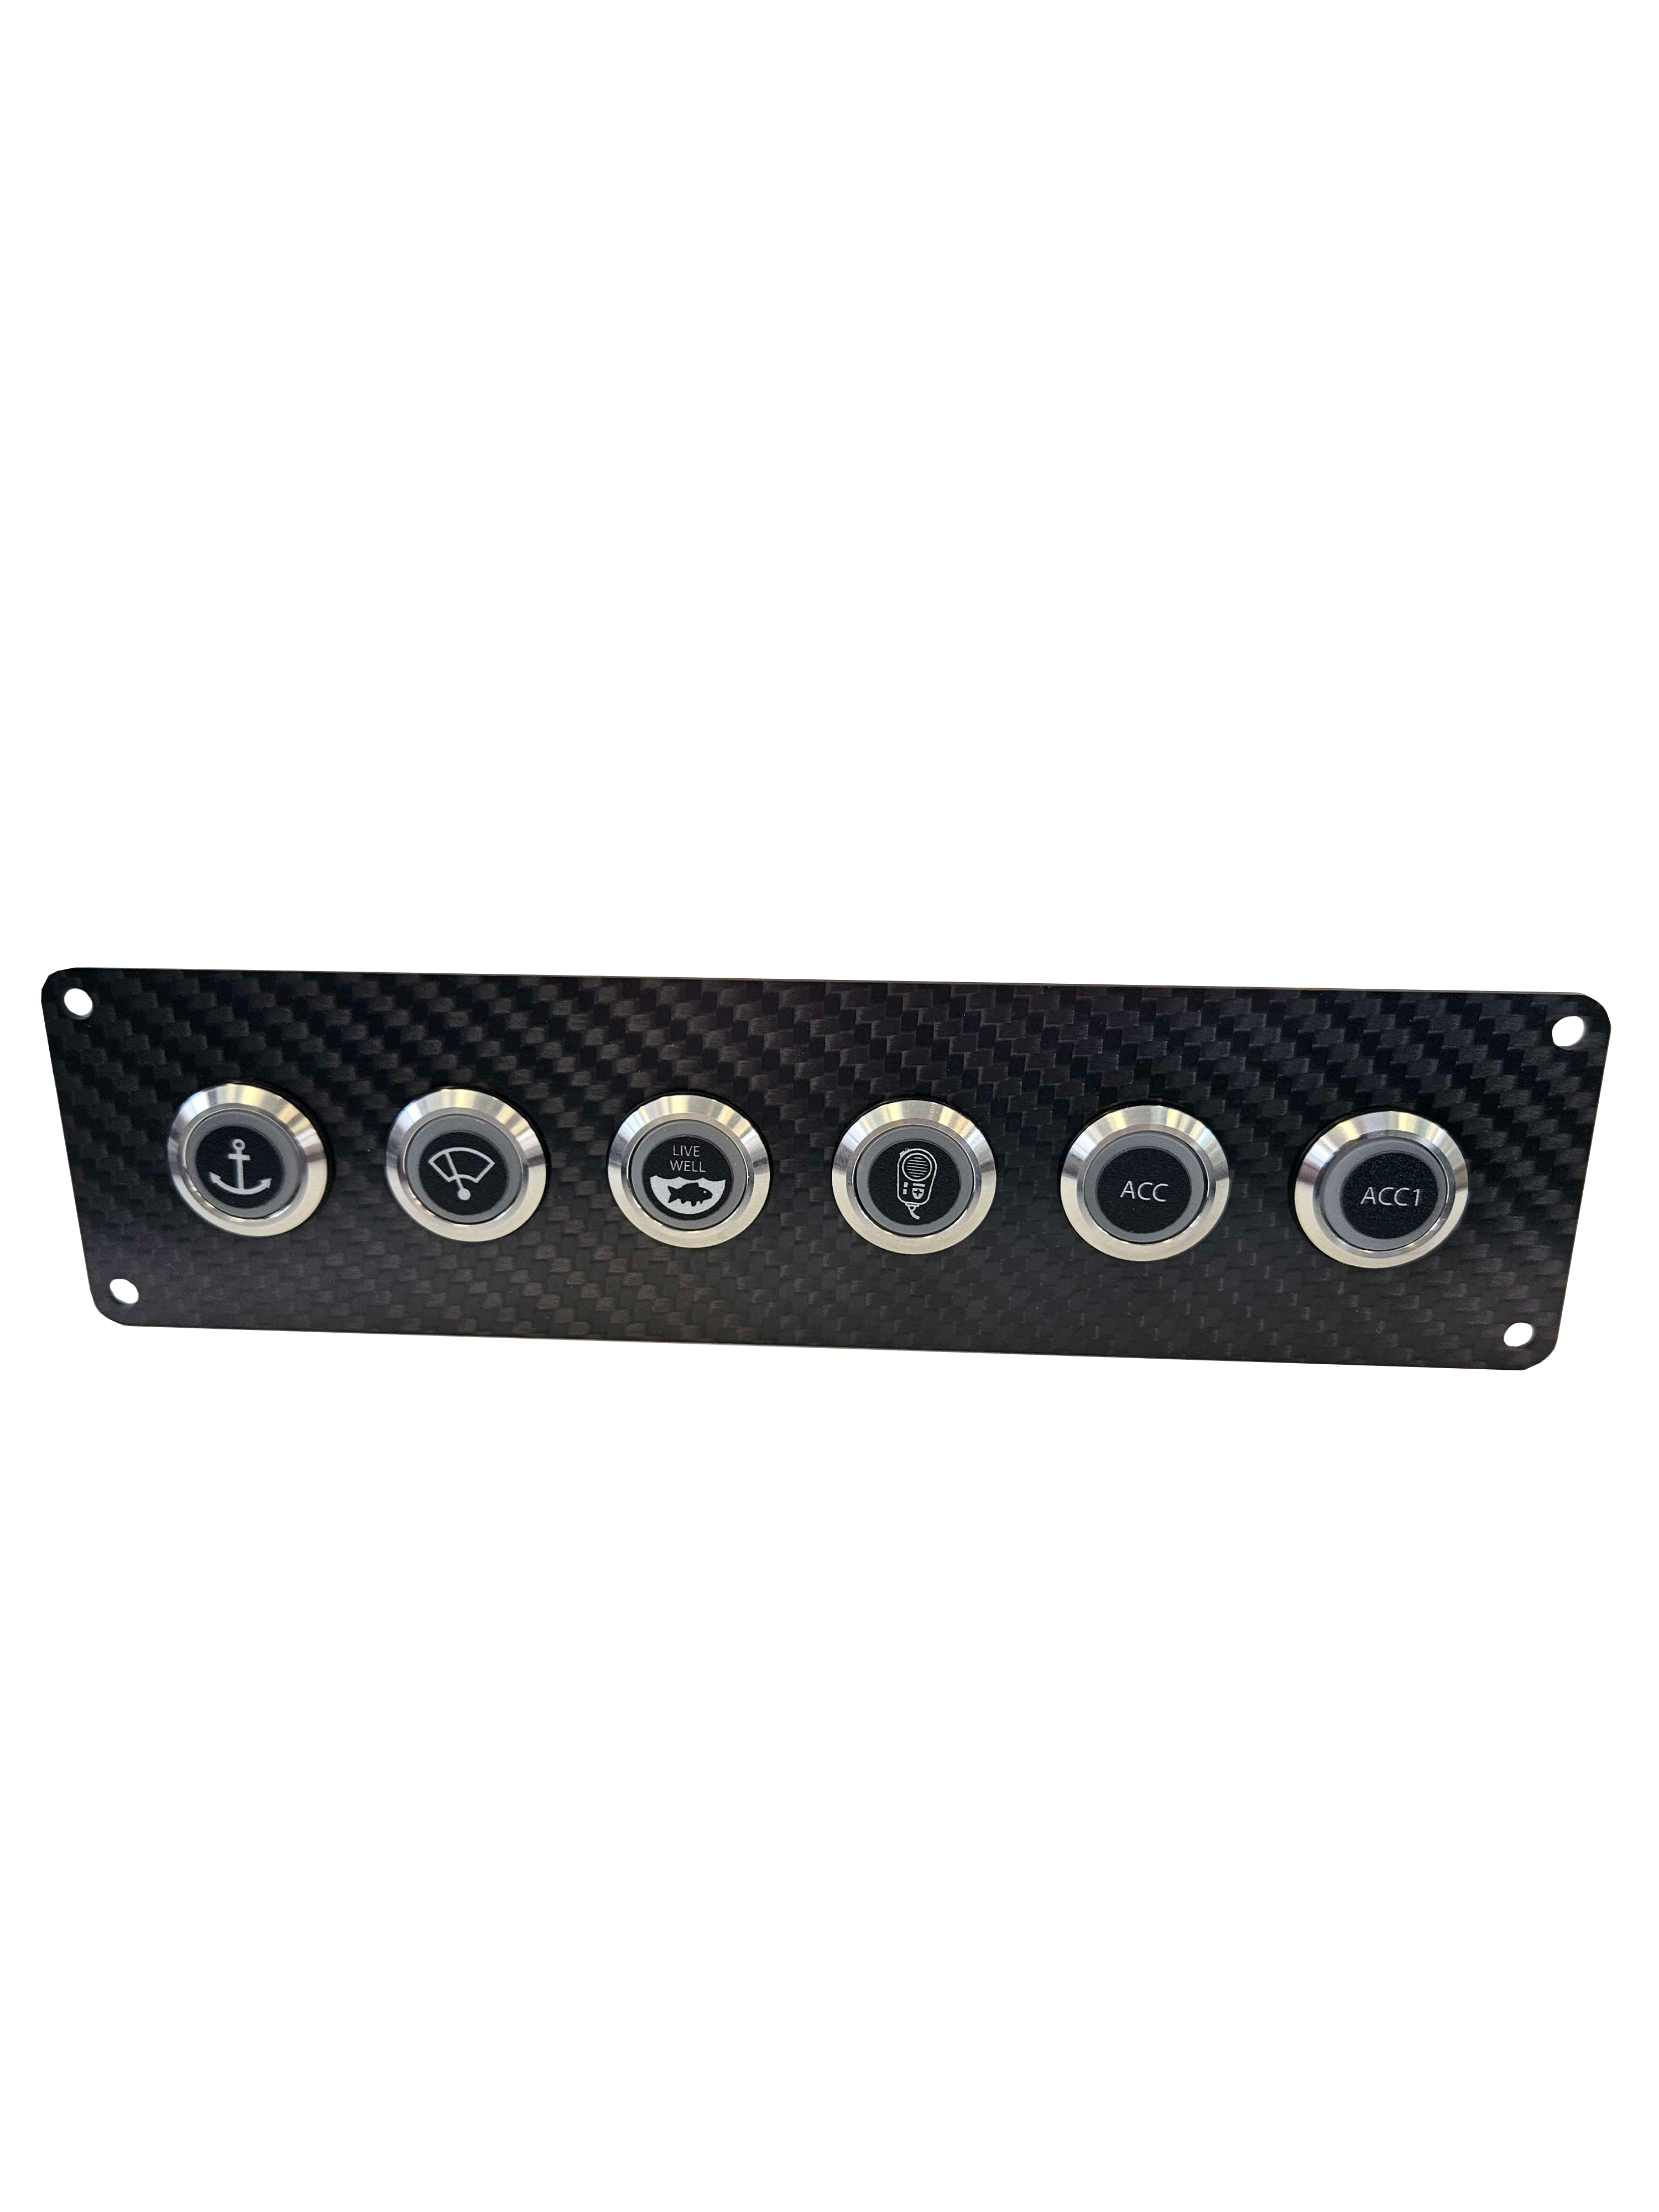 6 gang INLINE carbon fibre switch panel with 20A backlit switches